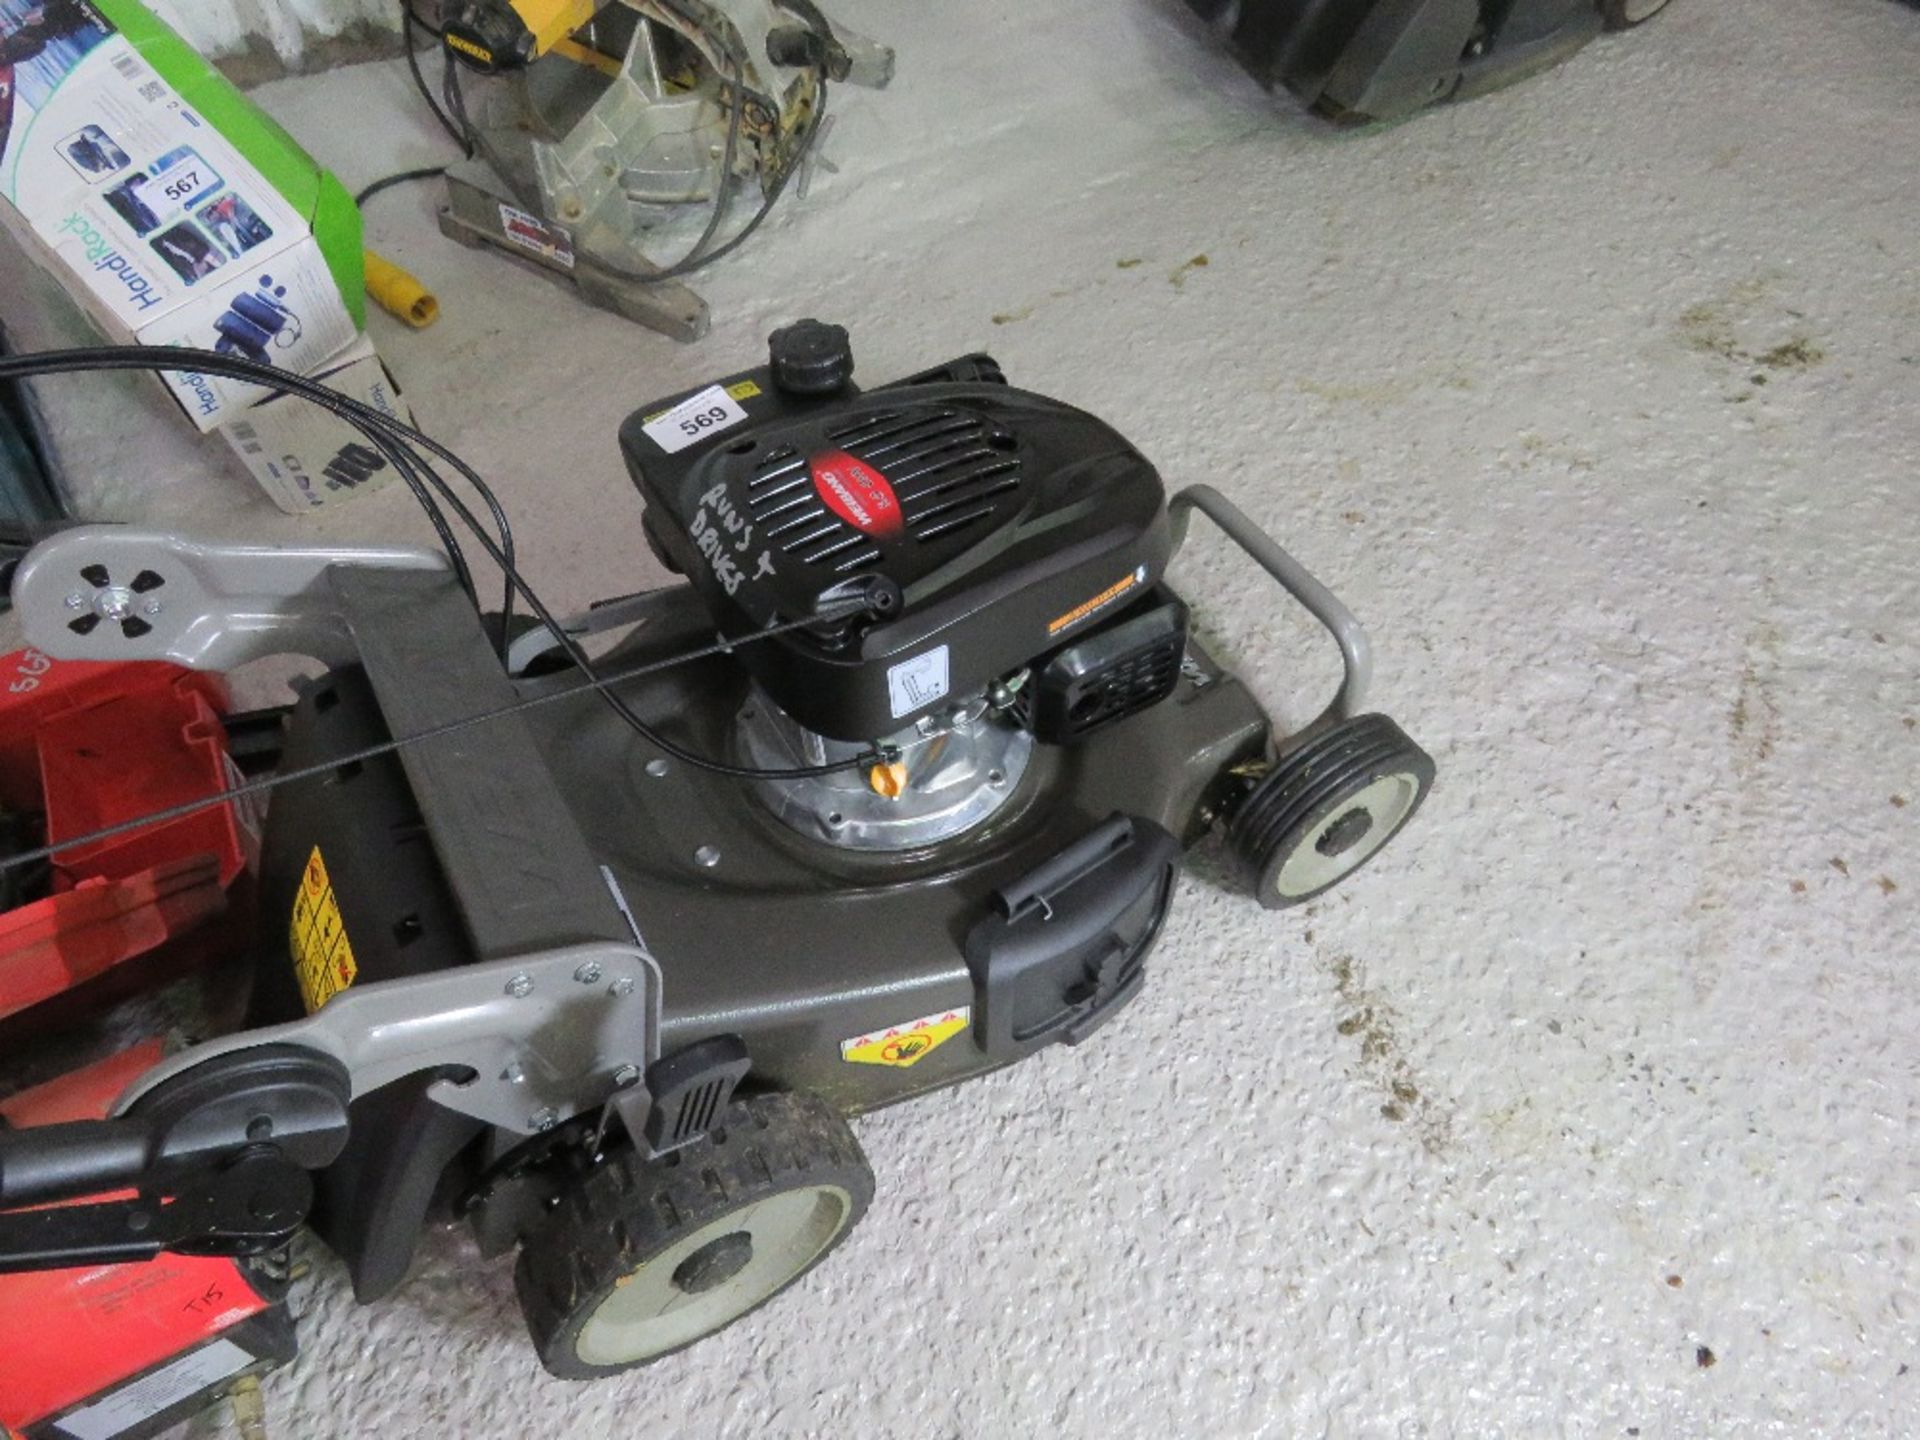 WEIBANG SELF DRIVE MOWER, YEAR 2020, LITTLE SIGN OF USE. WHEN TESTED WAS SEEN TO RUN AND DRIVE AND B - Image 5 of 5